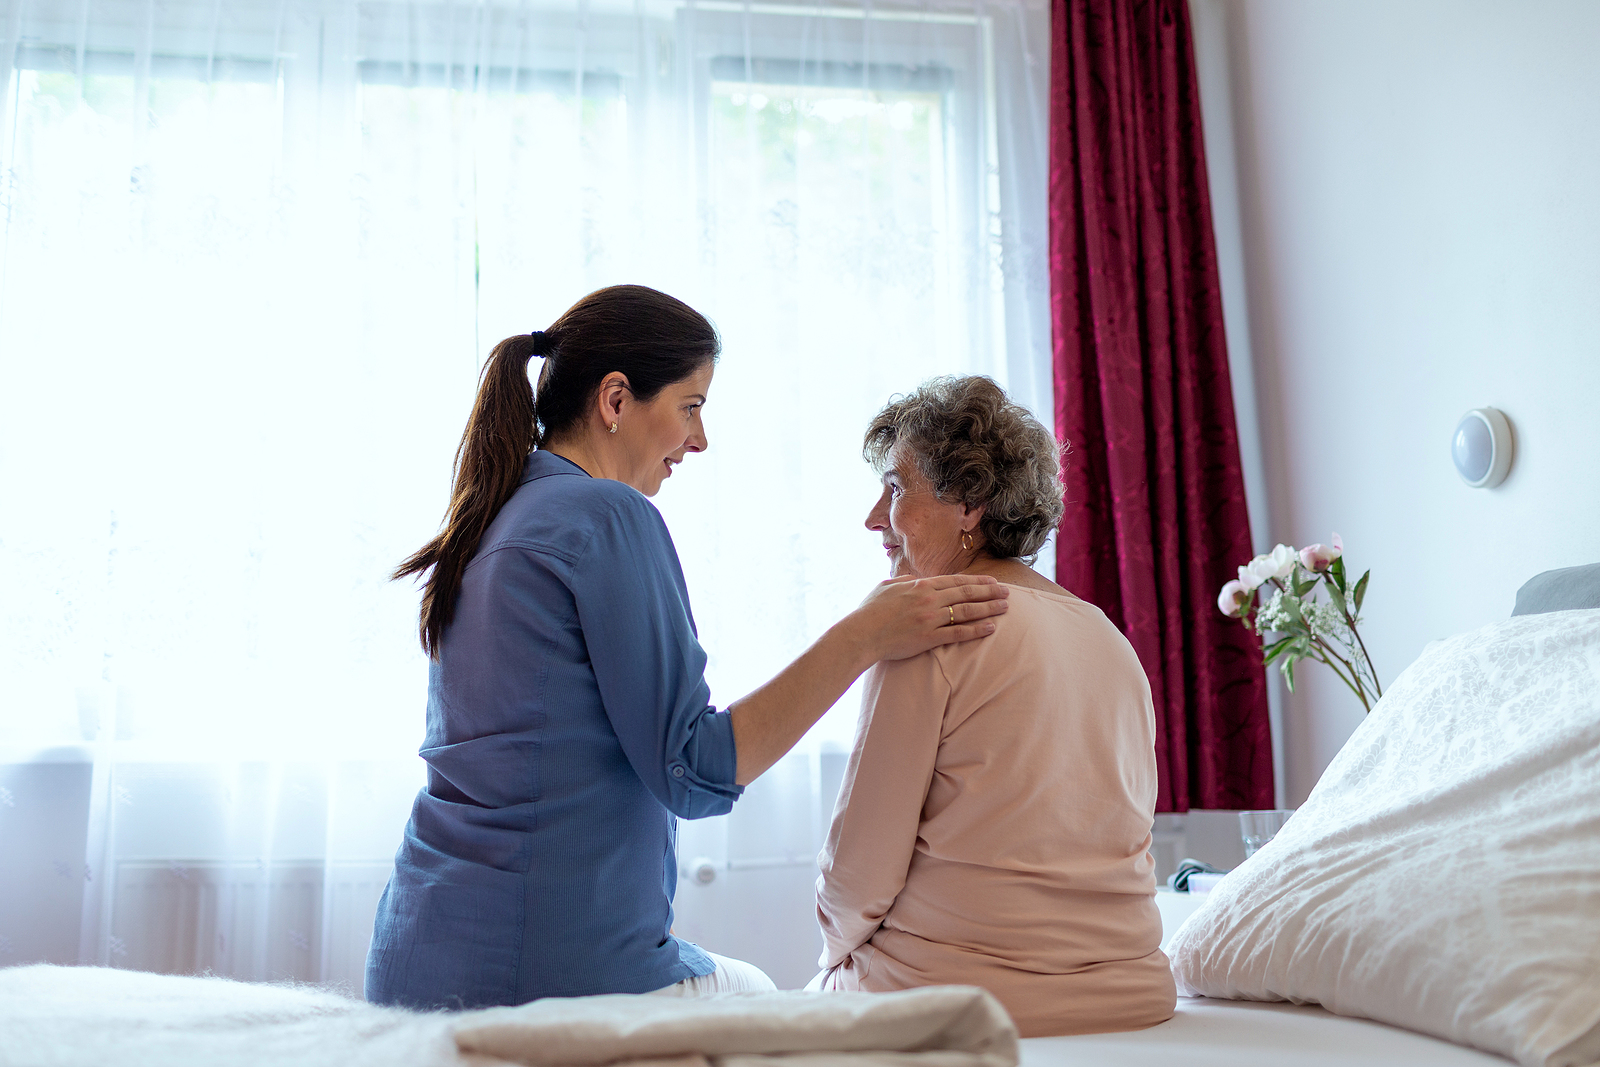 Companion Care at Home in Summerlin NV